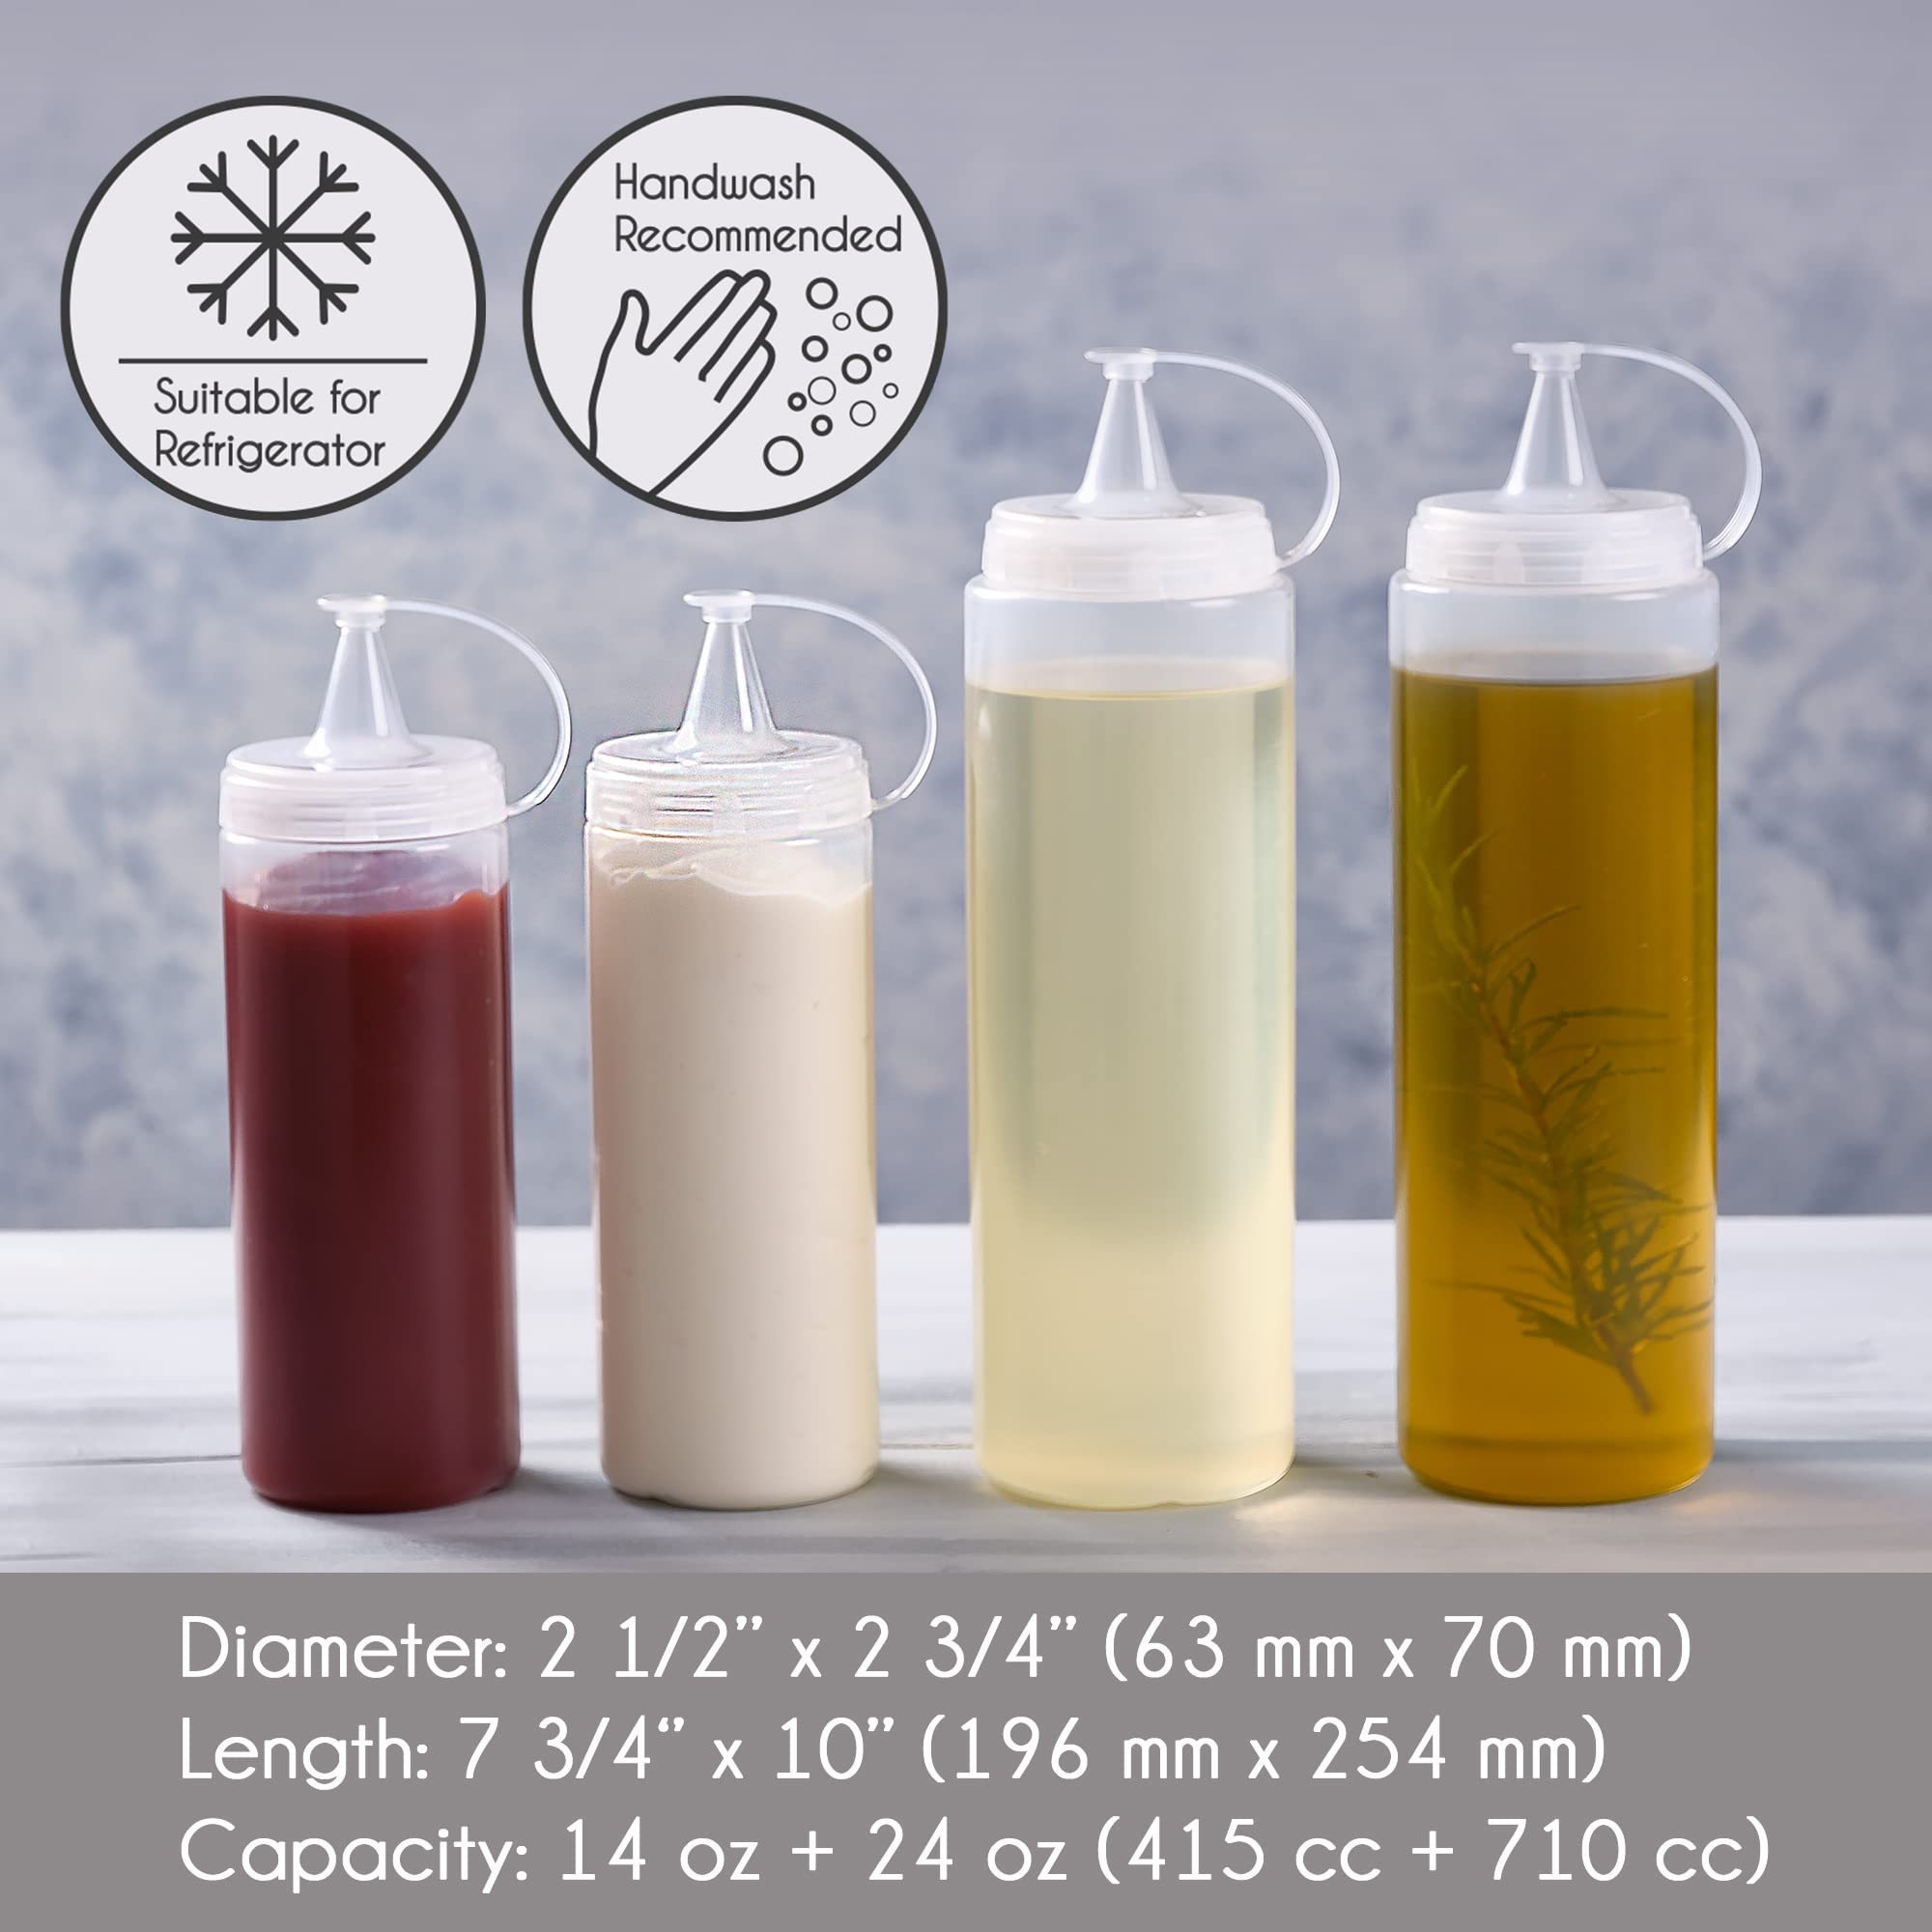 Crystalia Squeeze Bottles, Squirt Bottle Set with Cap, Condiment Squeeze Container for Oil Ketchup Mustard BBQ Sauce Syrup, 4 PCs